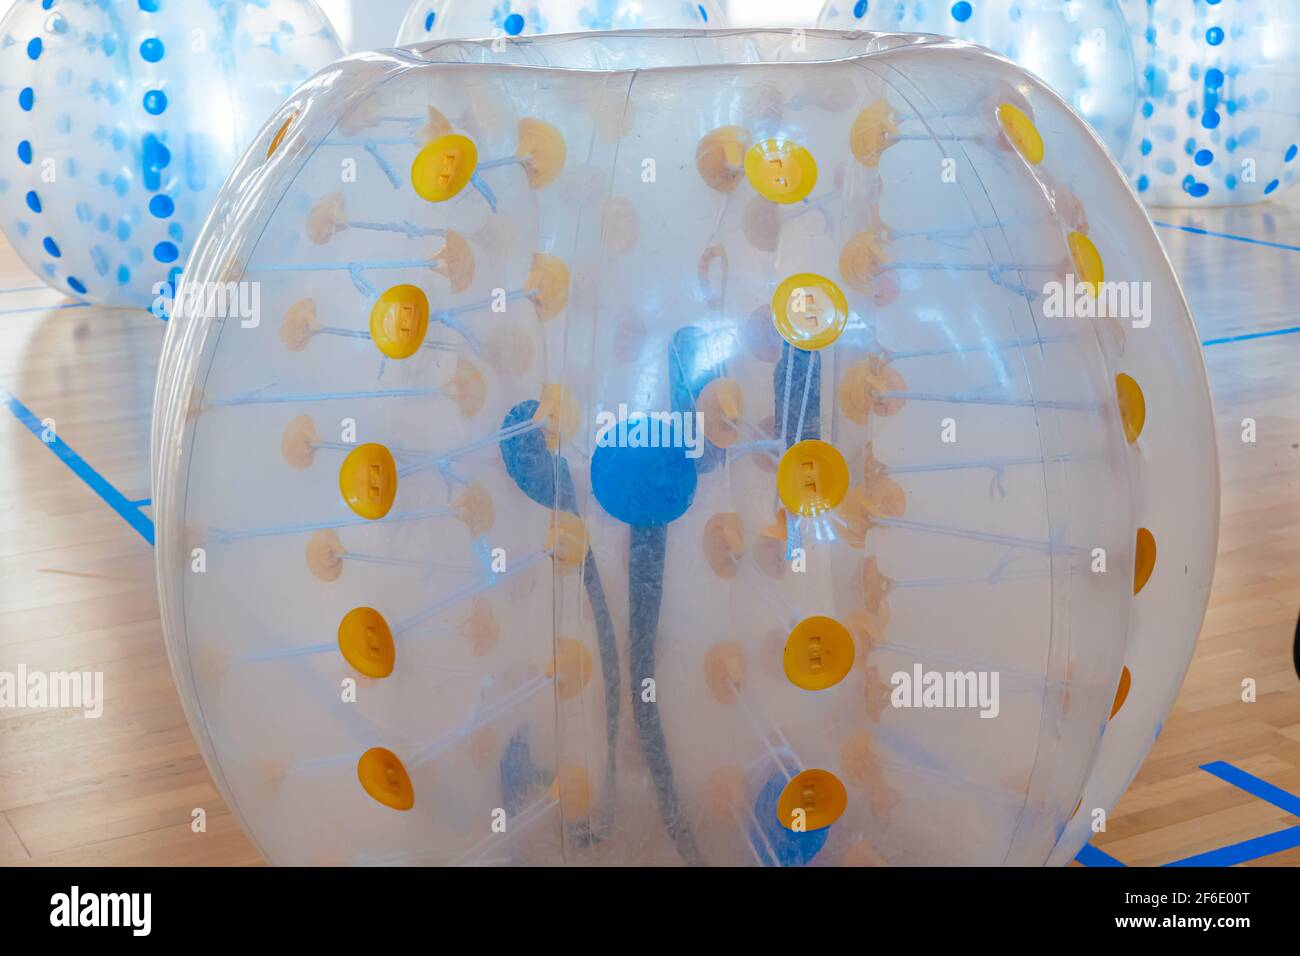 Inflatable bubble ball football game -Fotos und -Bildmaterial in hoher  Auflösung – Alamy